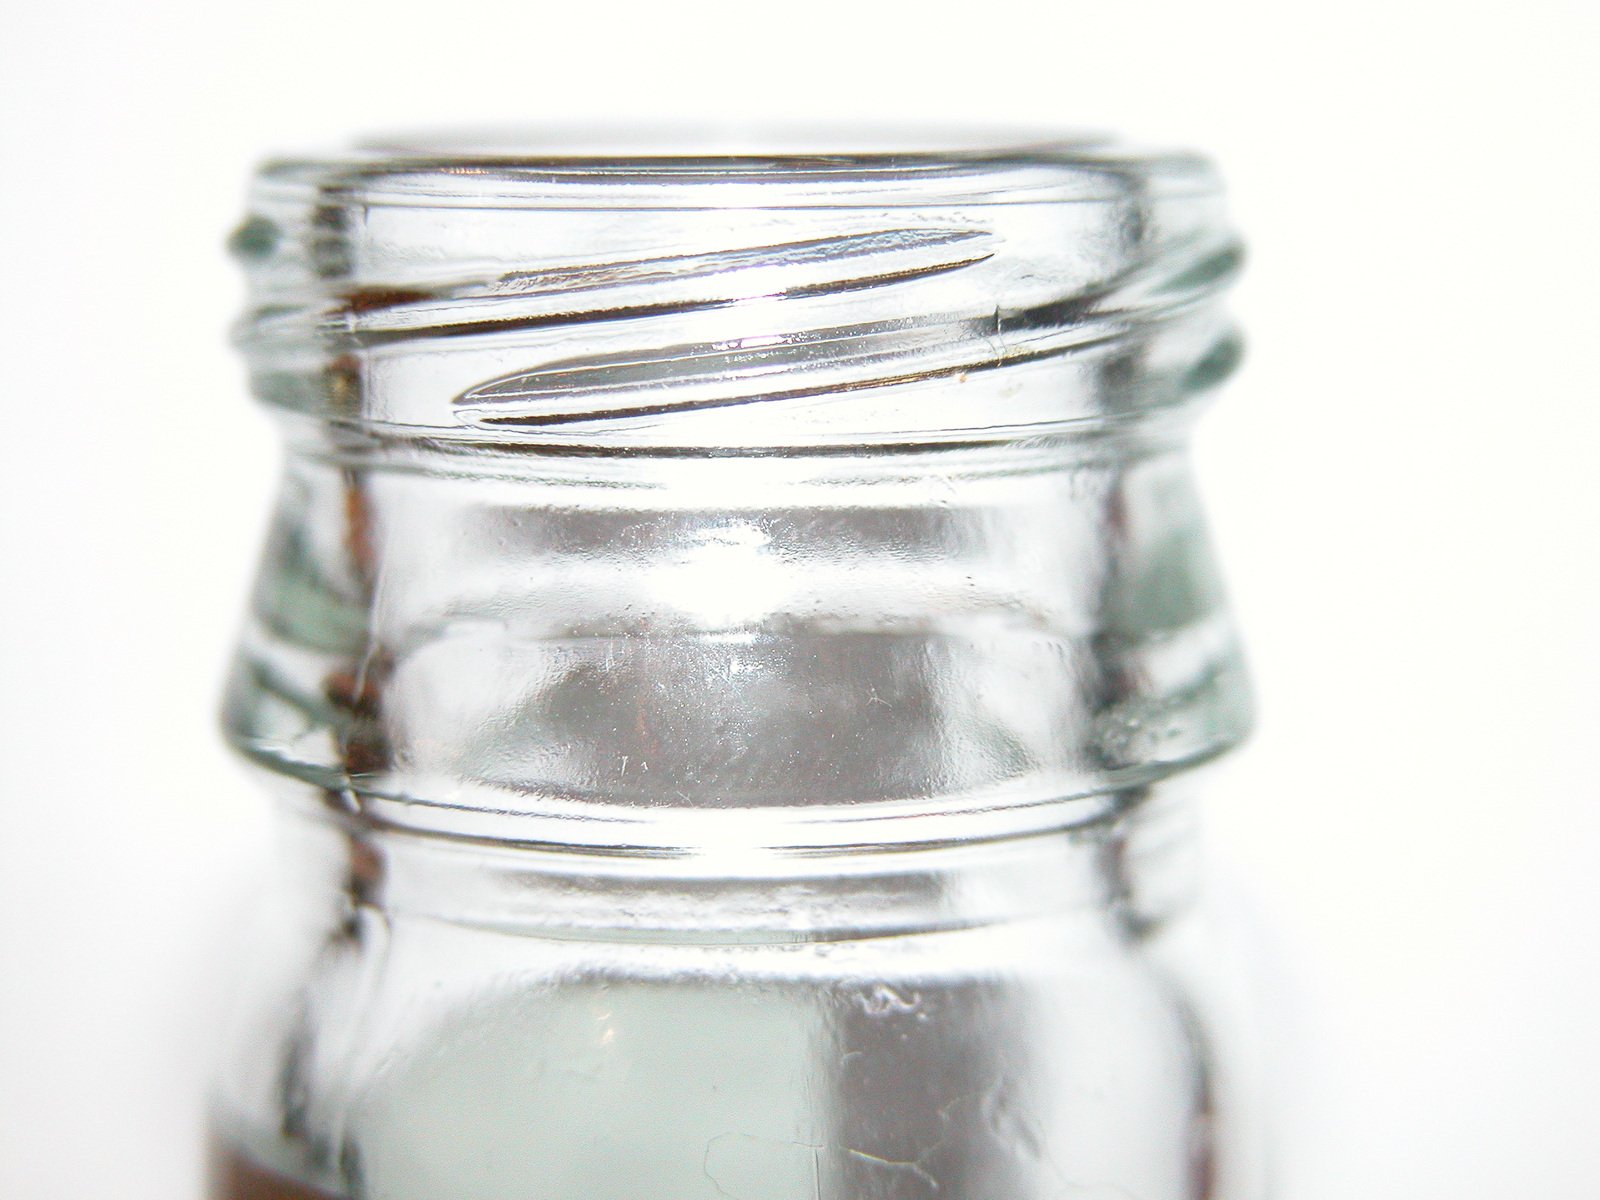 a close up of a glass jar with liquid